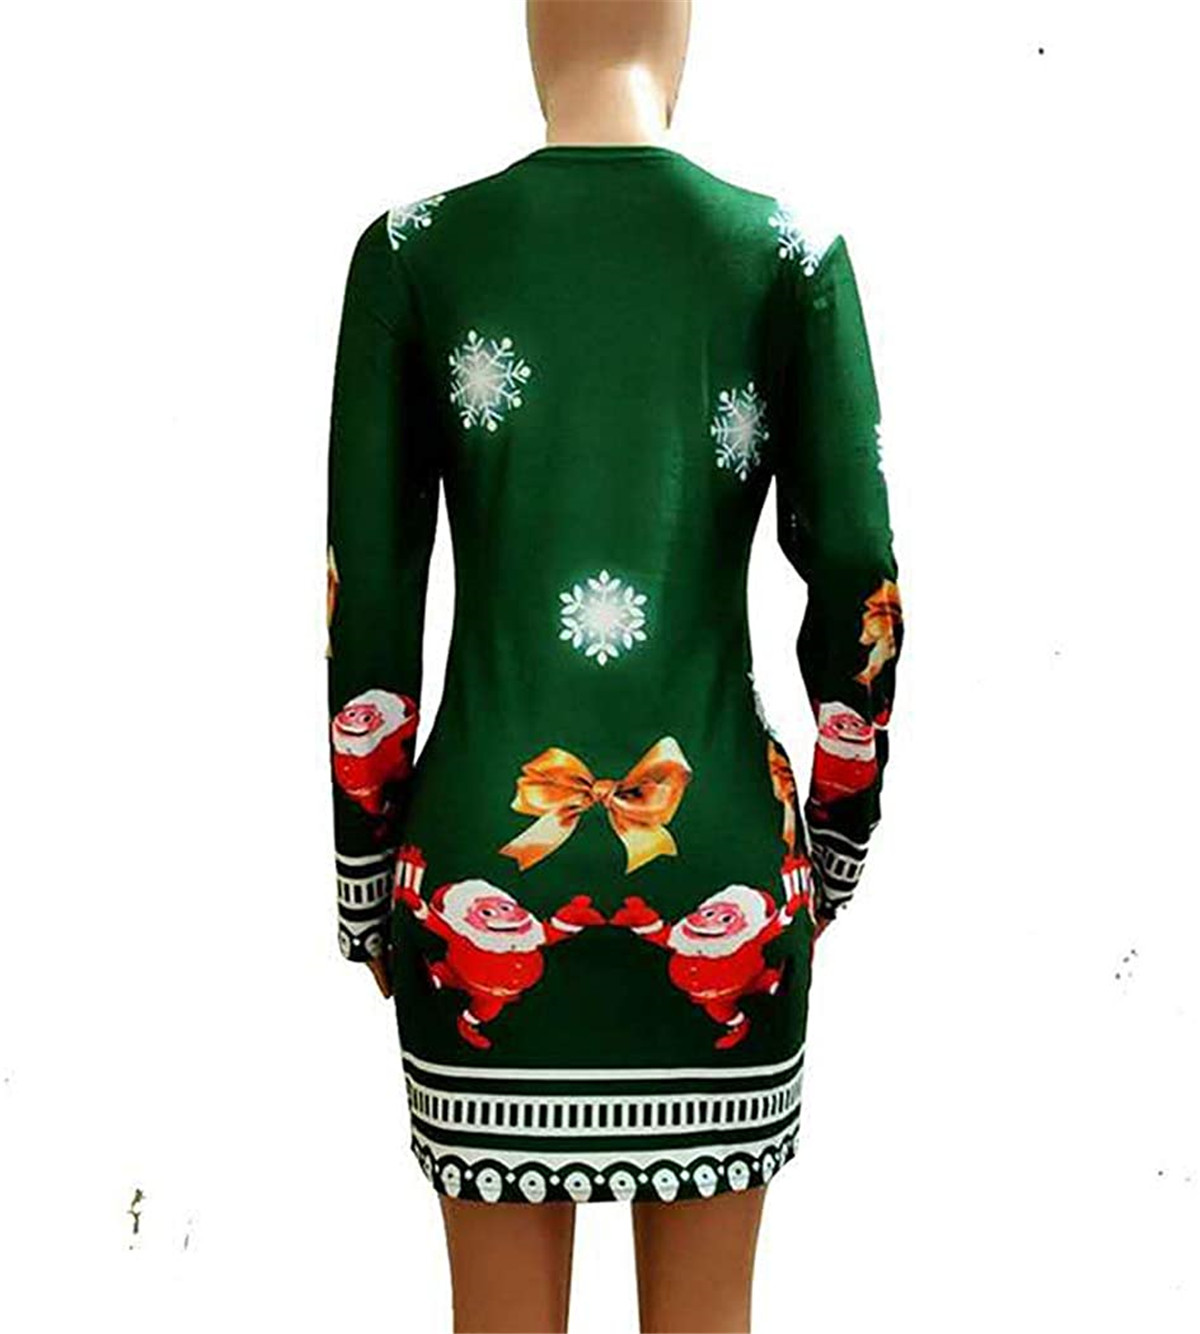 Kiapeise Kiapeise Women Ugly Christmas Sweater Dress Themed Print Long Sleeve Round Neck Dress Fall and Winter Clothes - image 3 of 6